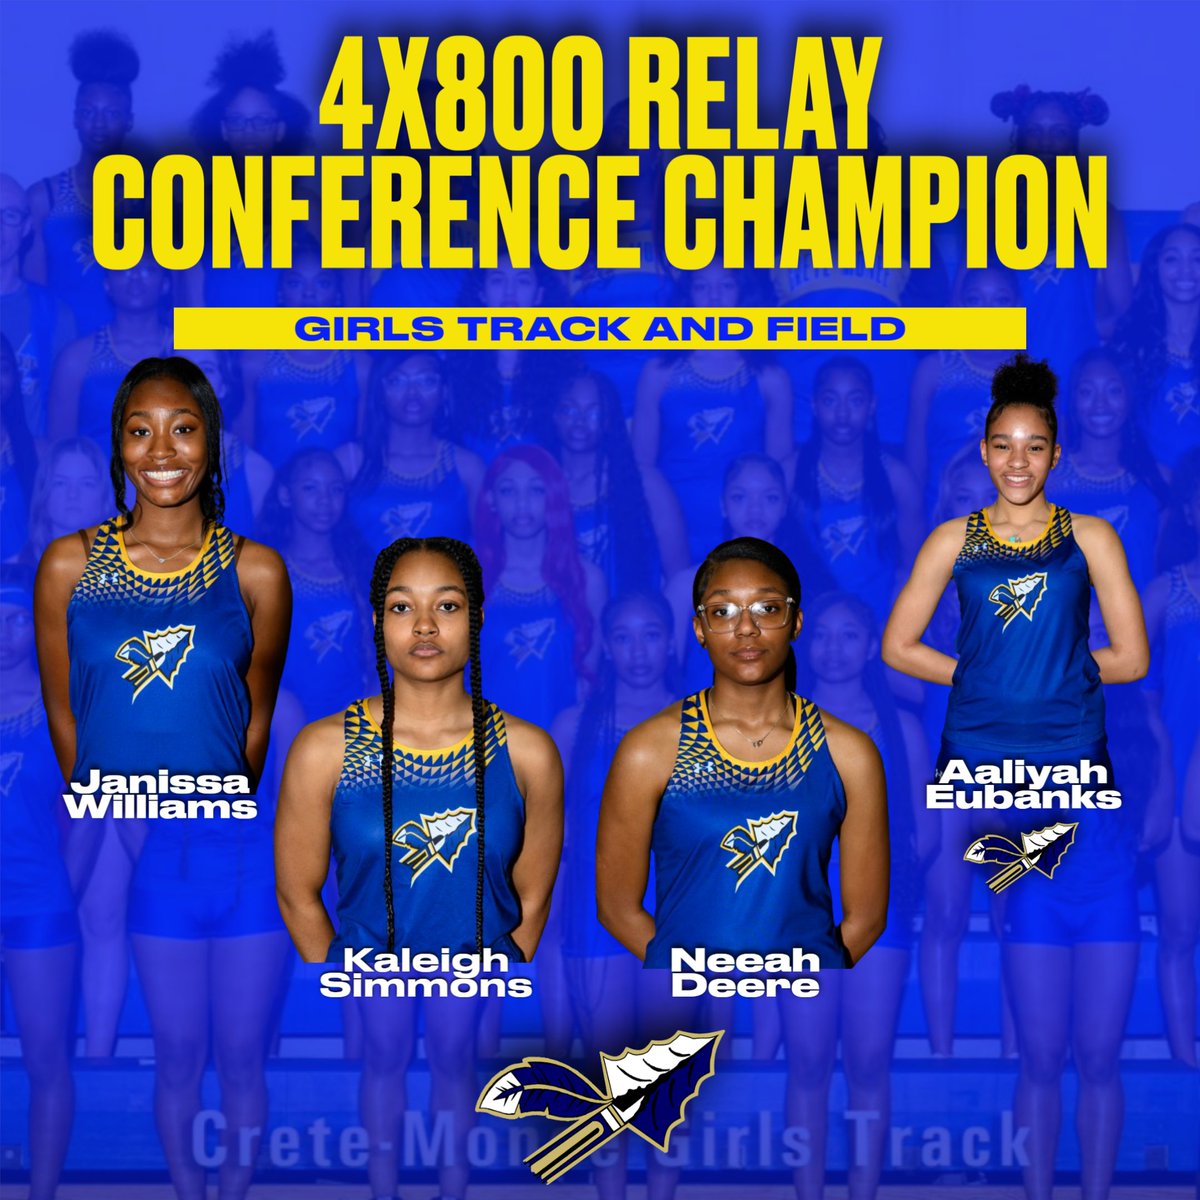 Congratulations to your Southland Athletic Conference Champions in the 4x800 Meter Relay! #GoWarriors